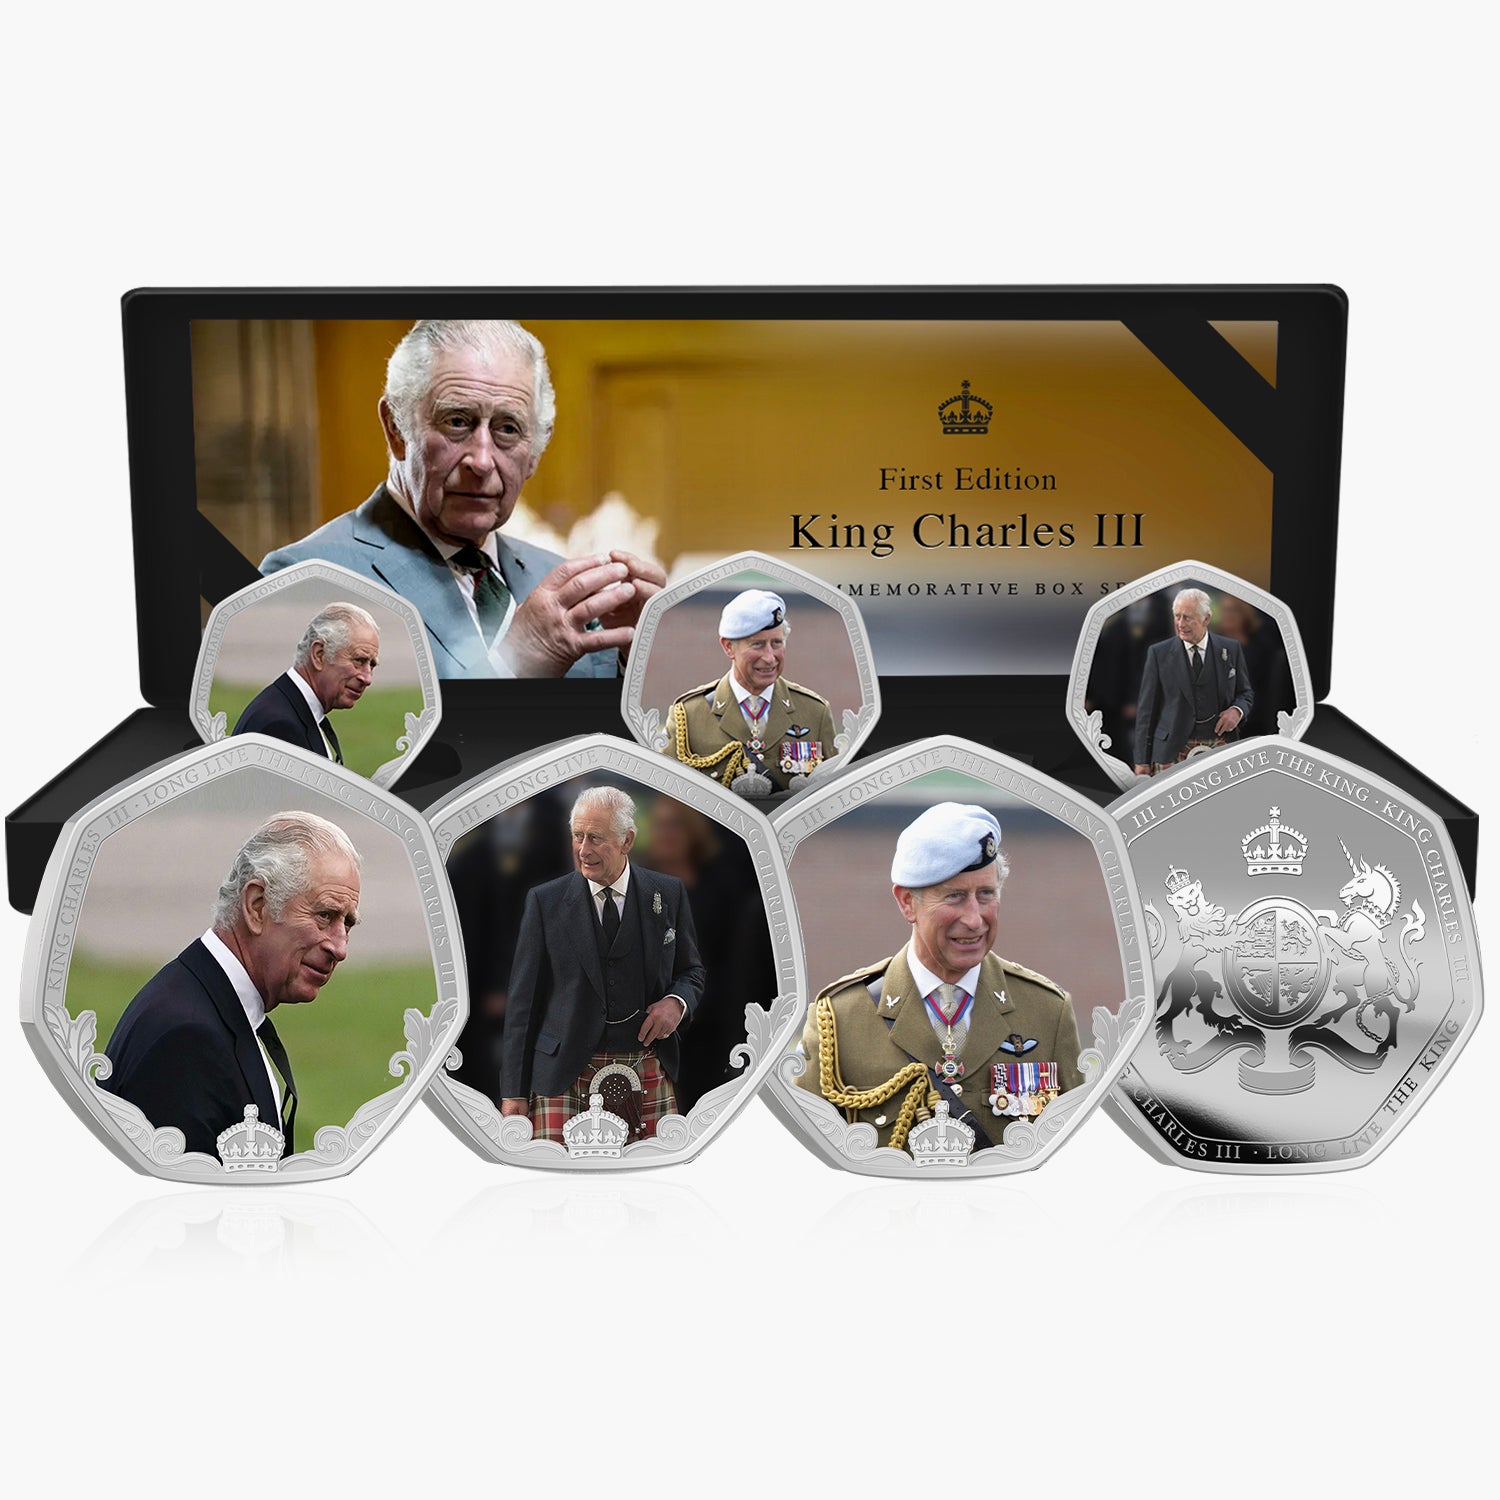 First Edition King Charles III Commemorative Box Set